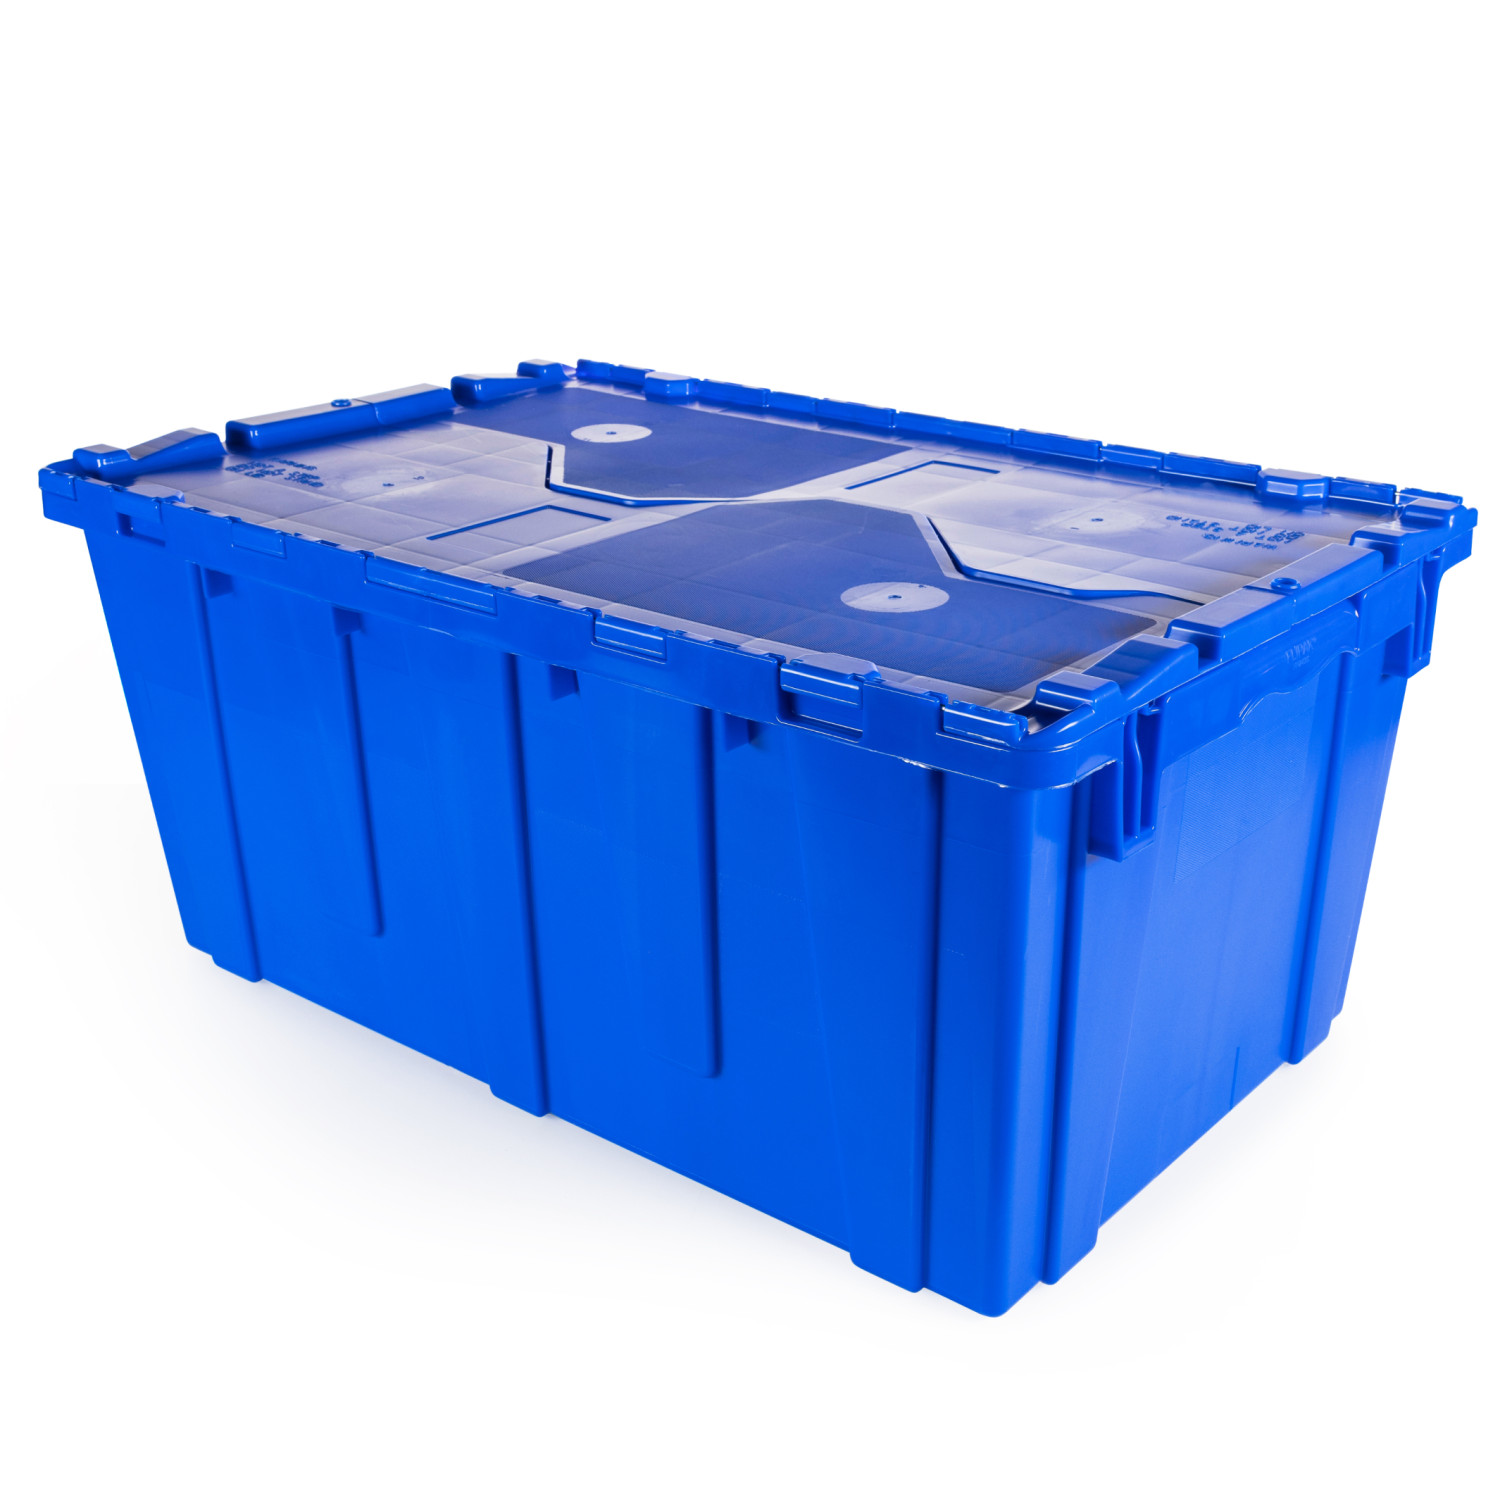 https://idlpack.com/image/cache/catalog/Products/Containers/2000x2000%20Blue%20Plastic%20Box%2026.9x16.9x12.1_white_bg%201-1500x1500.jpg